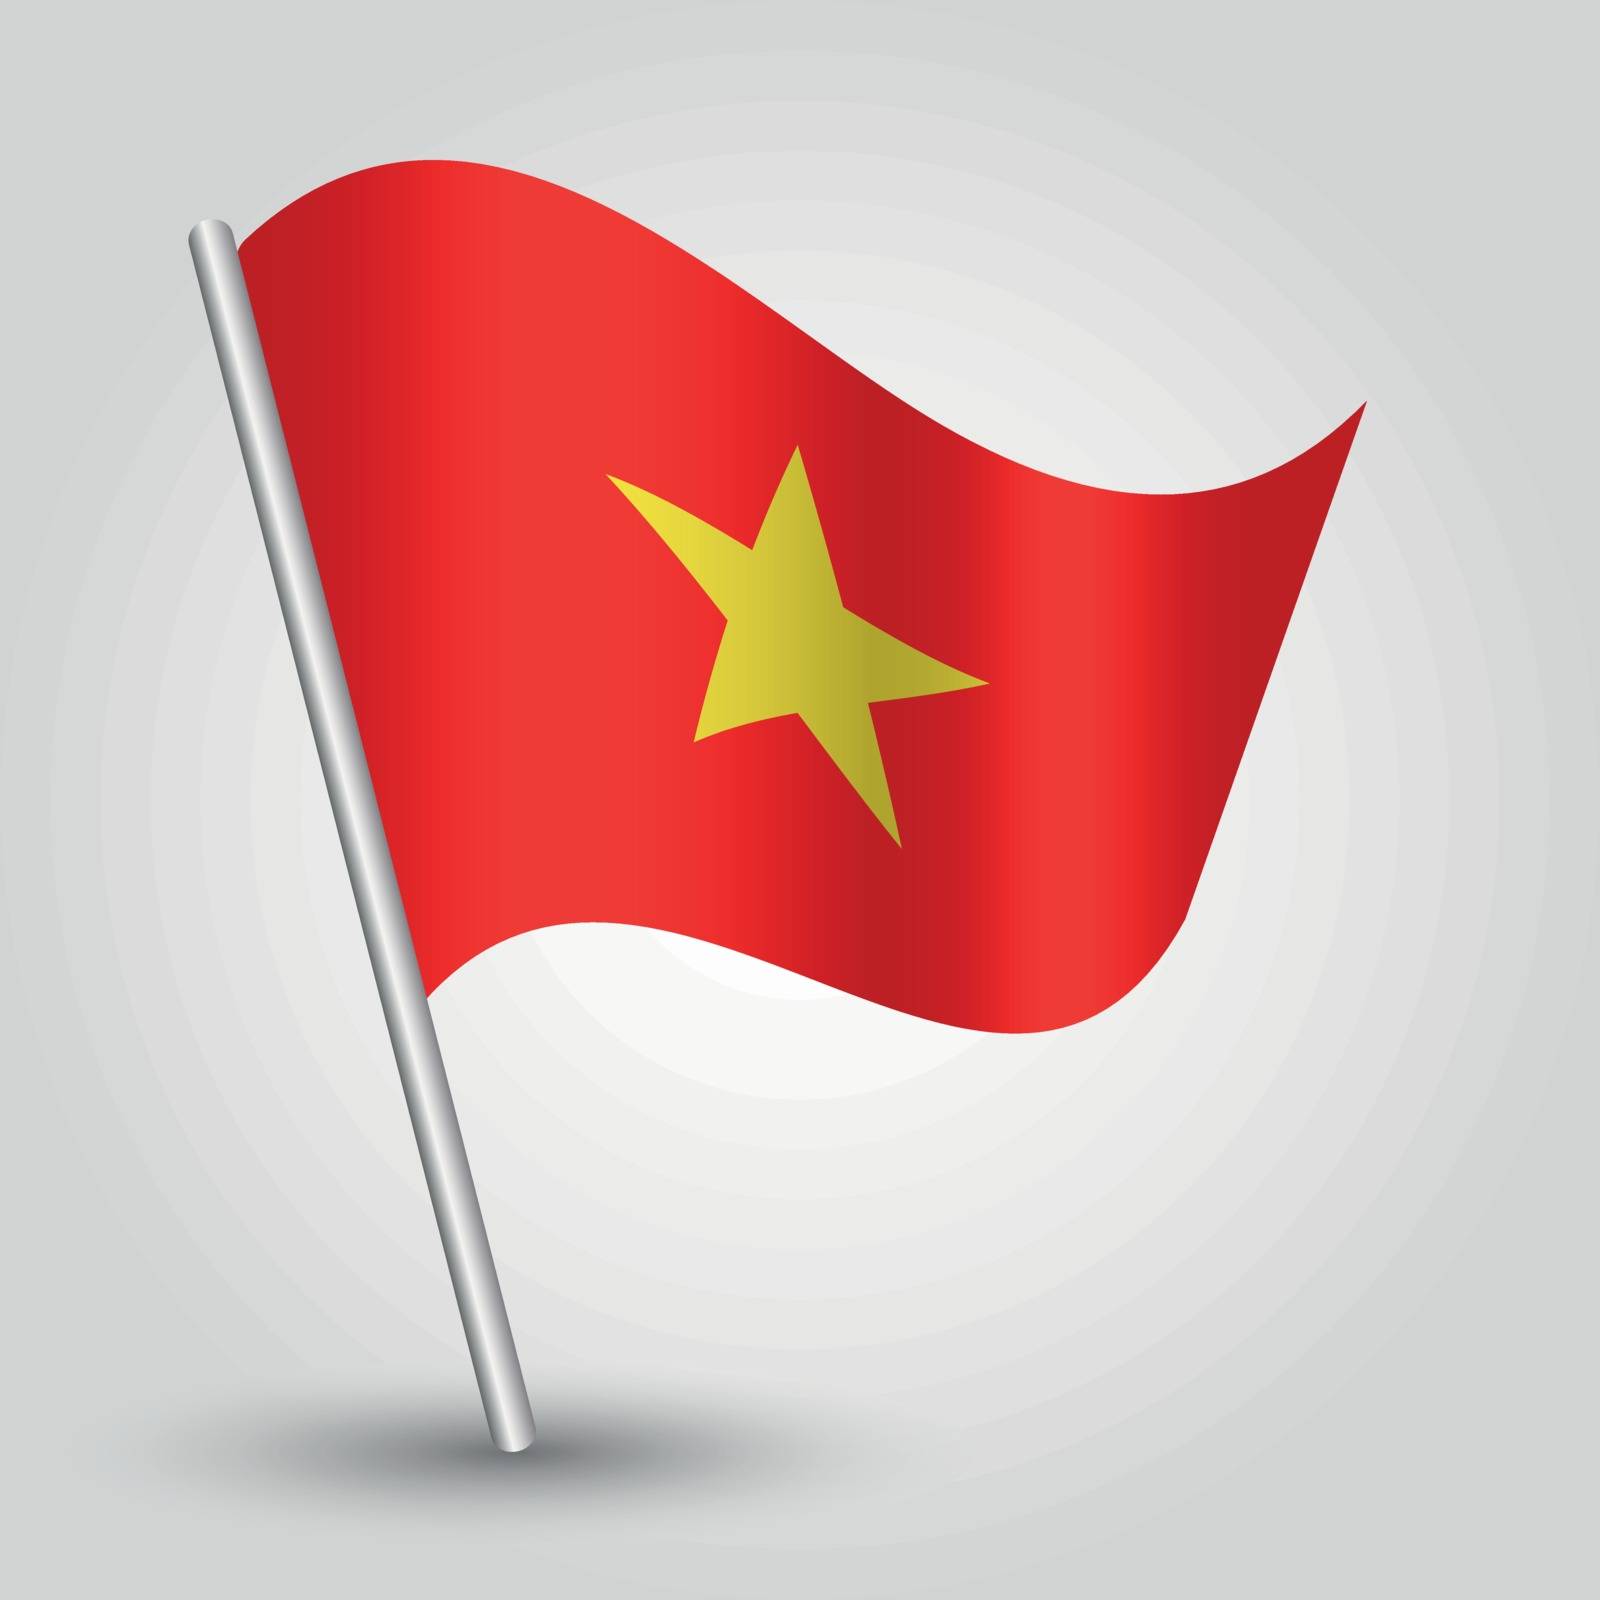 vector 3d waving vietnamese flag on pole - national symbol of Vietnam with inclined metal stick